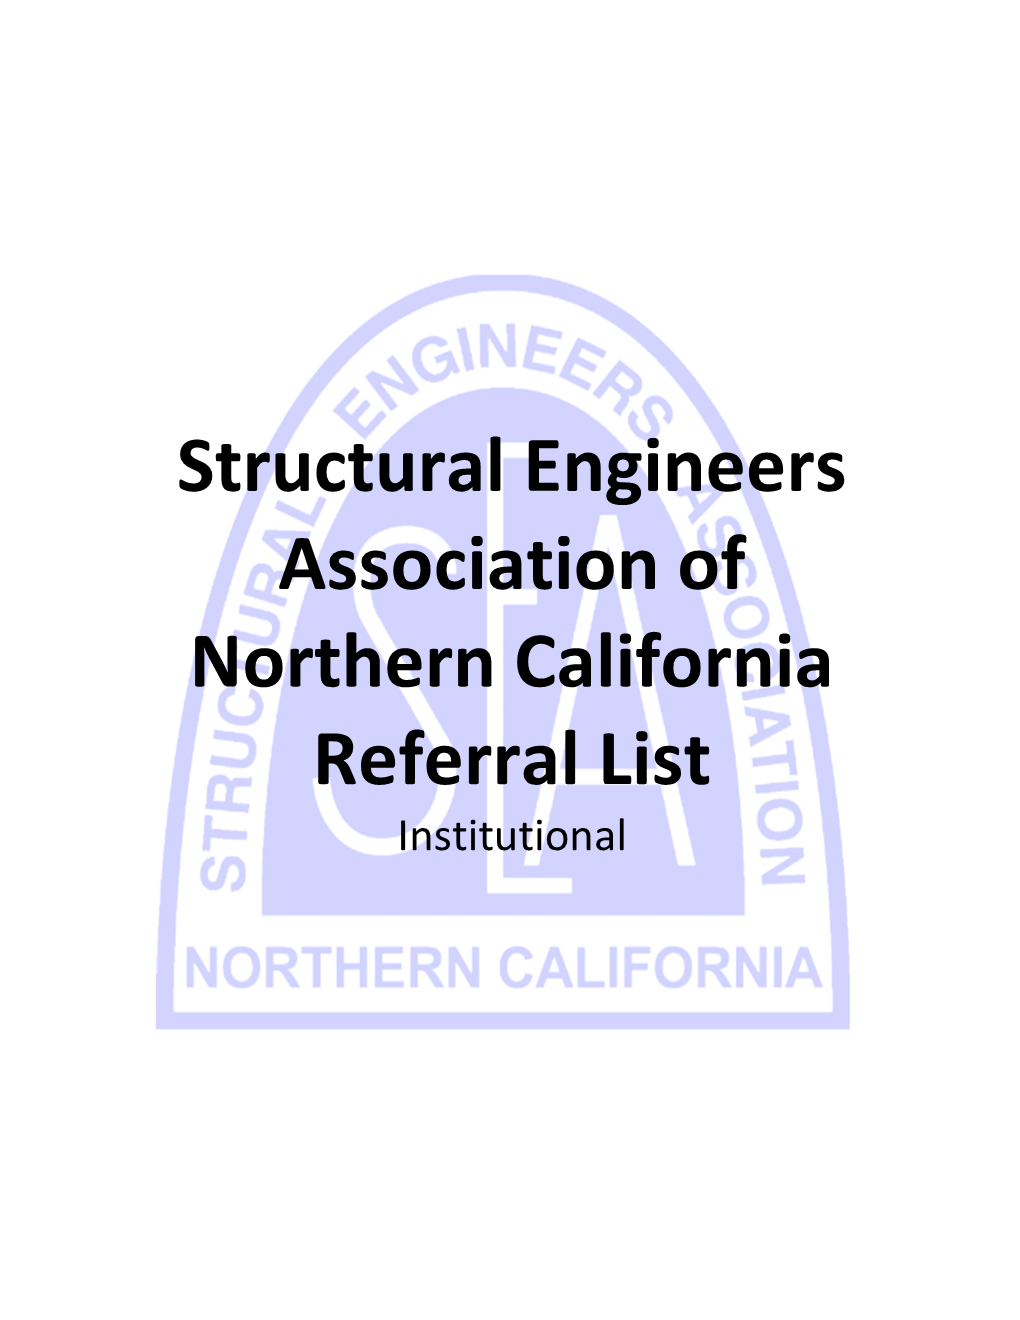 Structural Engineers Association of Northern California Referral List Institutional